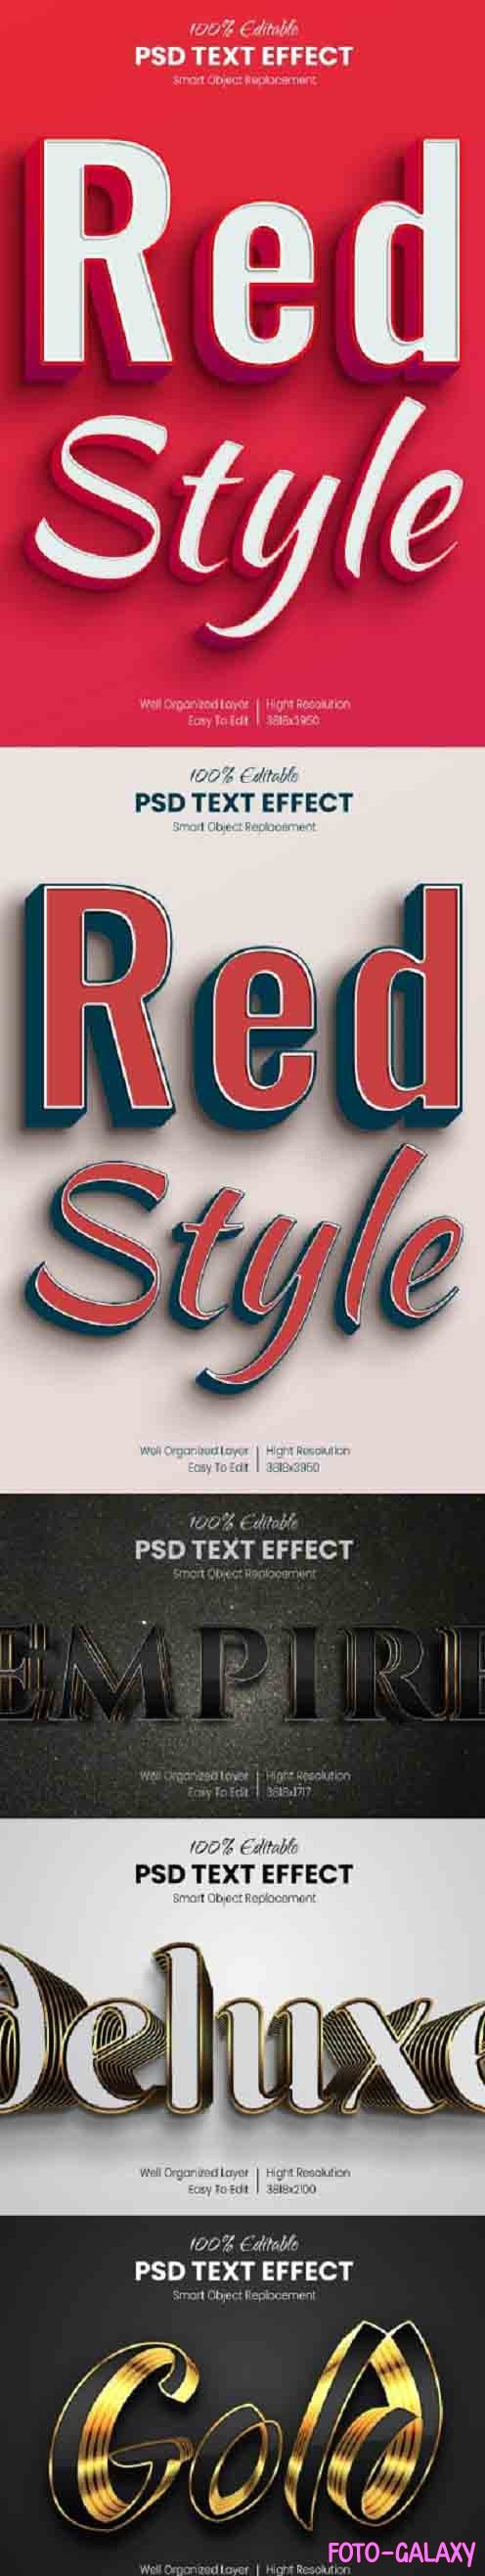 GraphicRiver - 13 Photoshop Text Effects - Luxury Styles 30702118